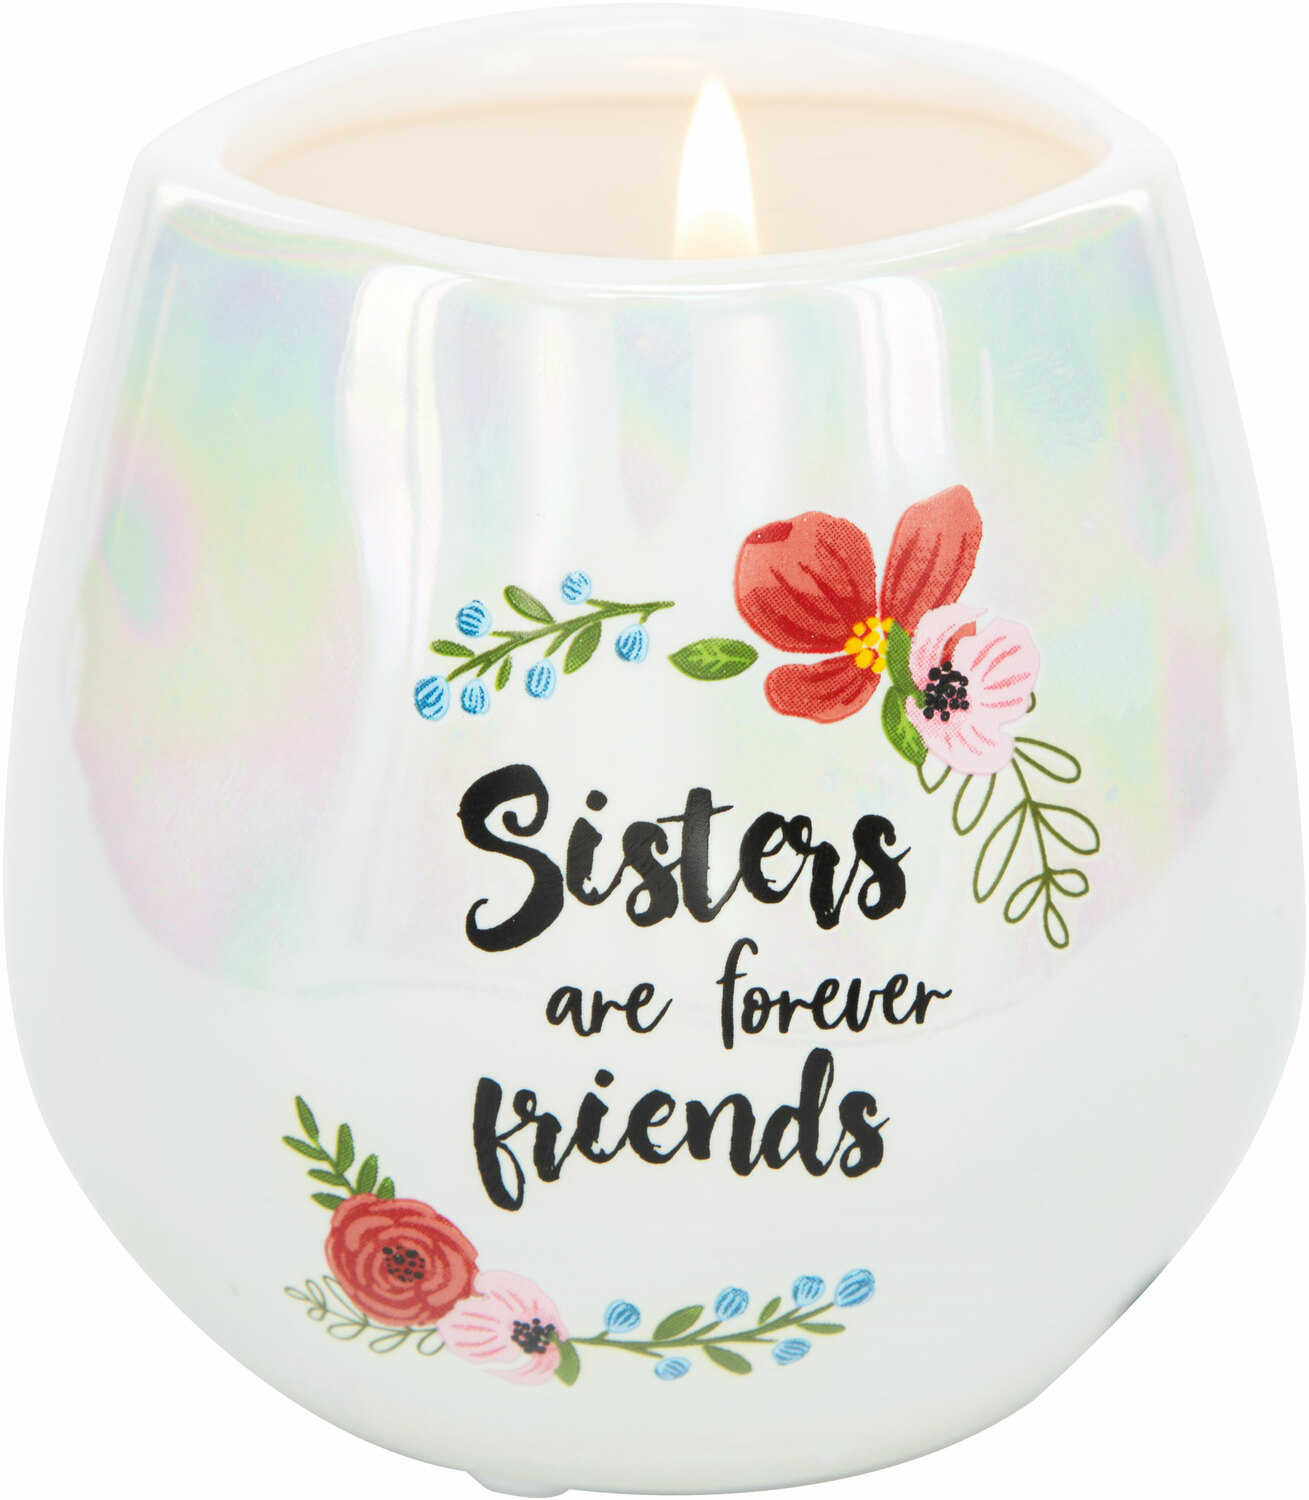 Sisters by Bunches of Love - Sisters - 8 oz - 100% Soy Wax Candle
Scent: Serenity